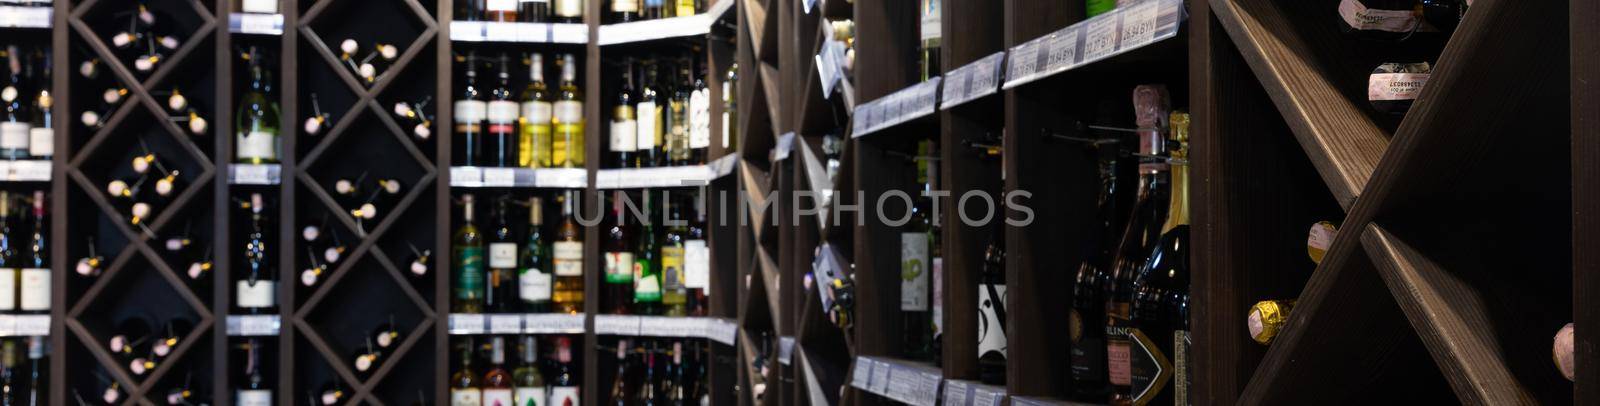 shelves of bottles of alcoholic beverages in a store selling wine and beer